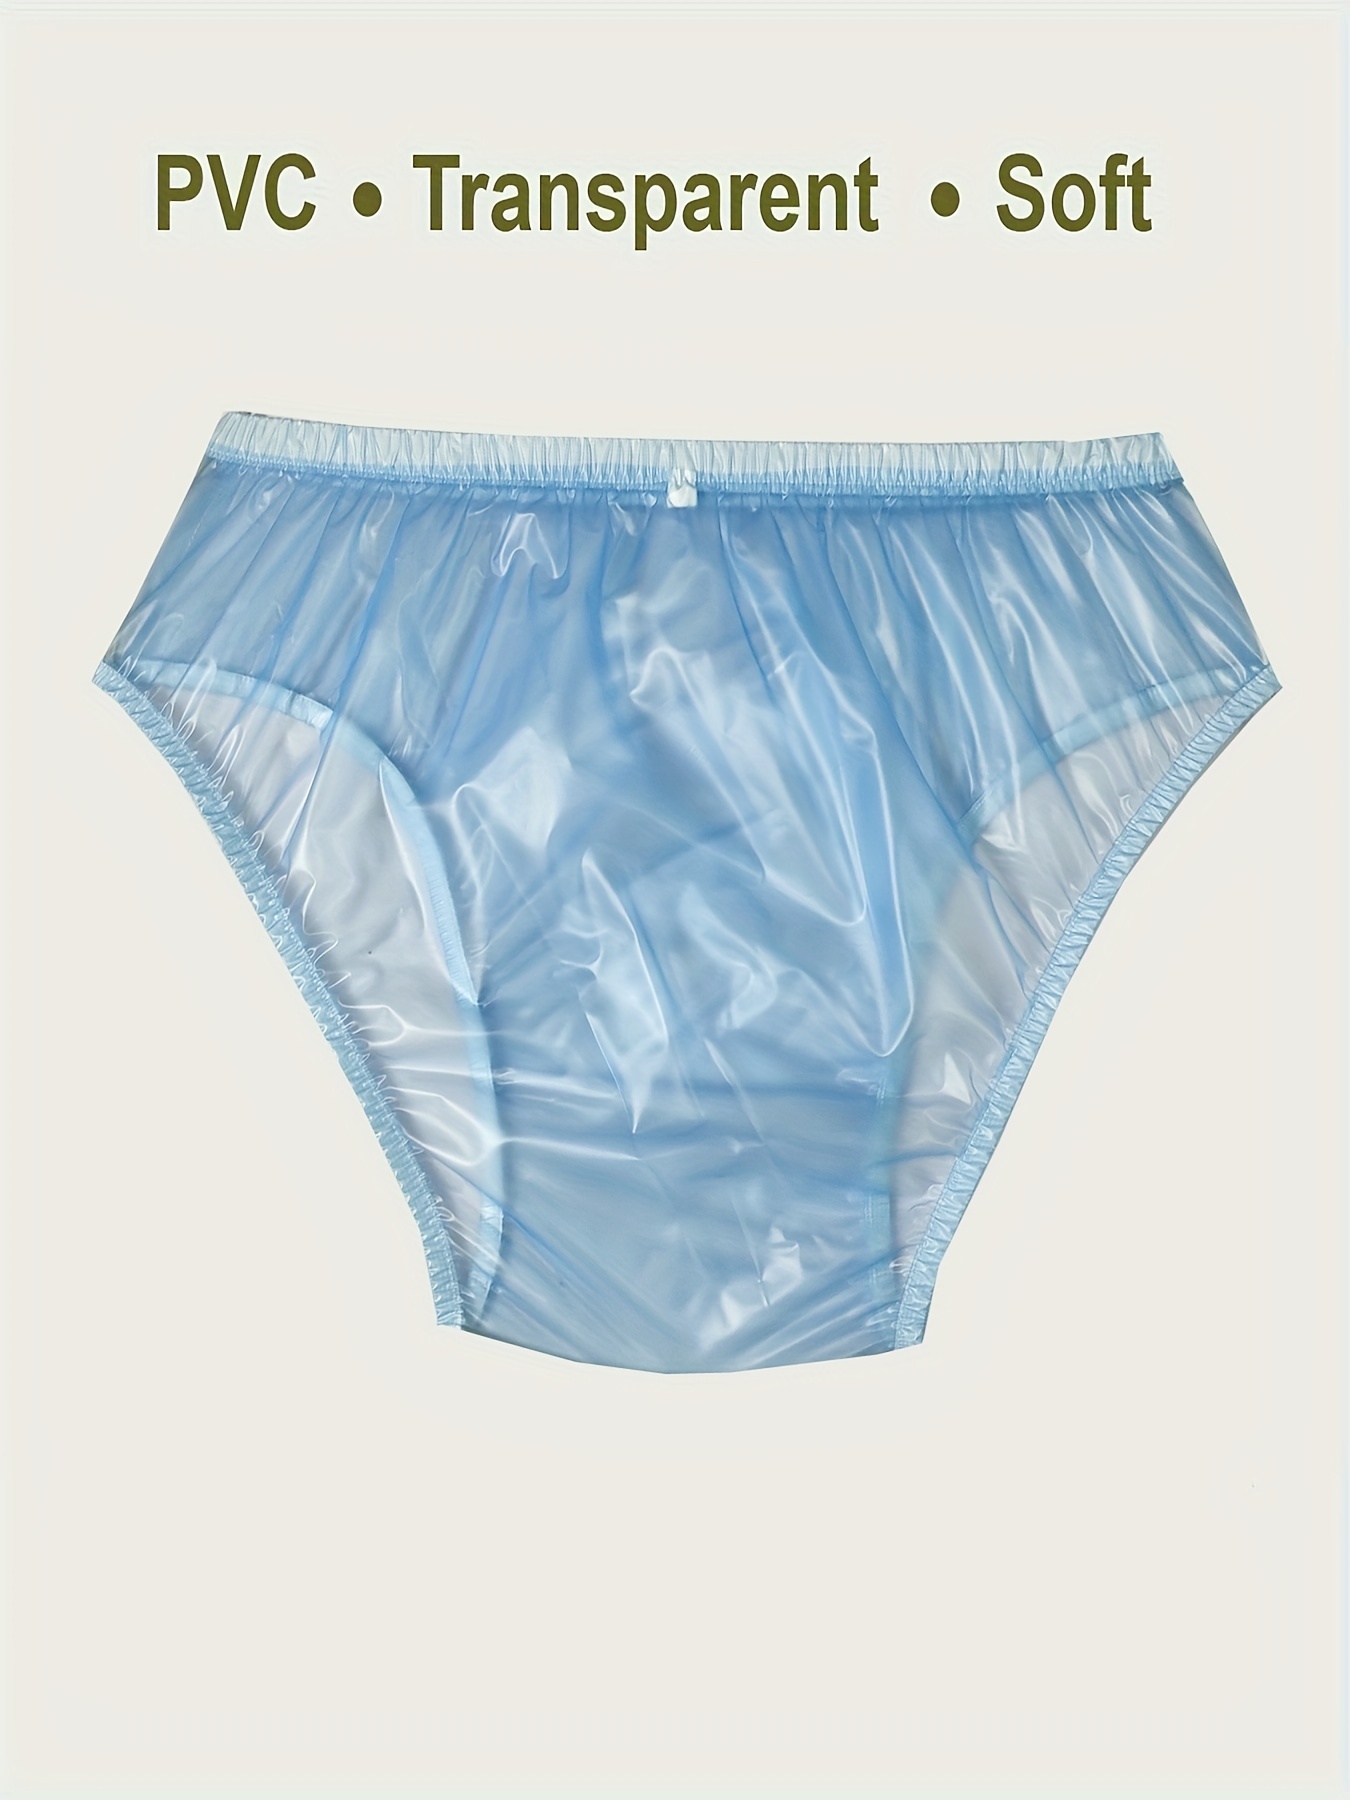 PEARLY CLEAR PVC High Side Pants / Briefs. Shiny Plastic Panties